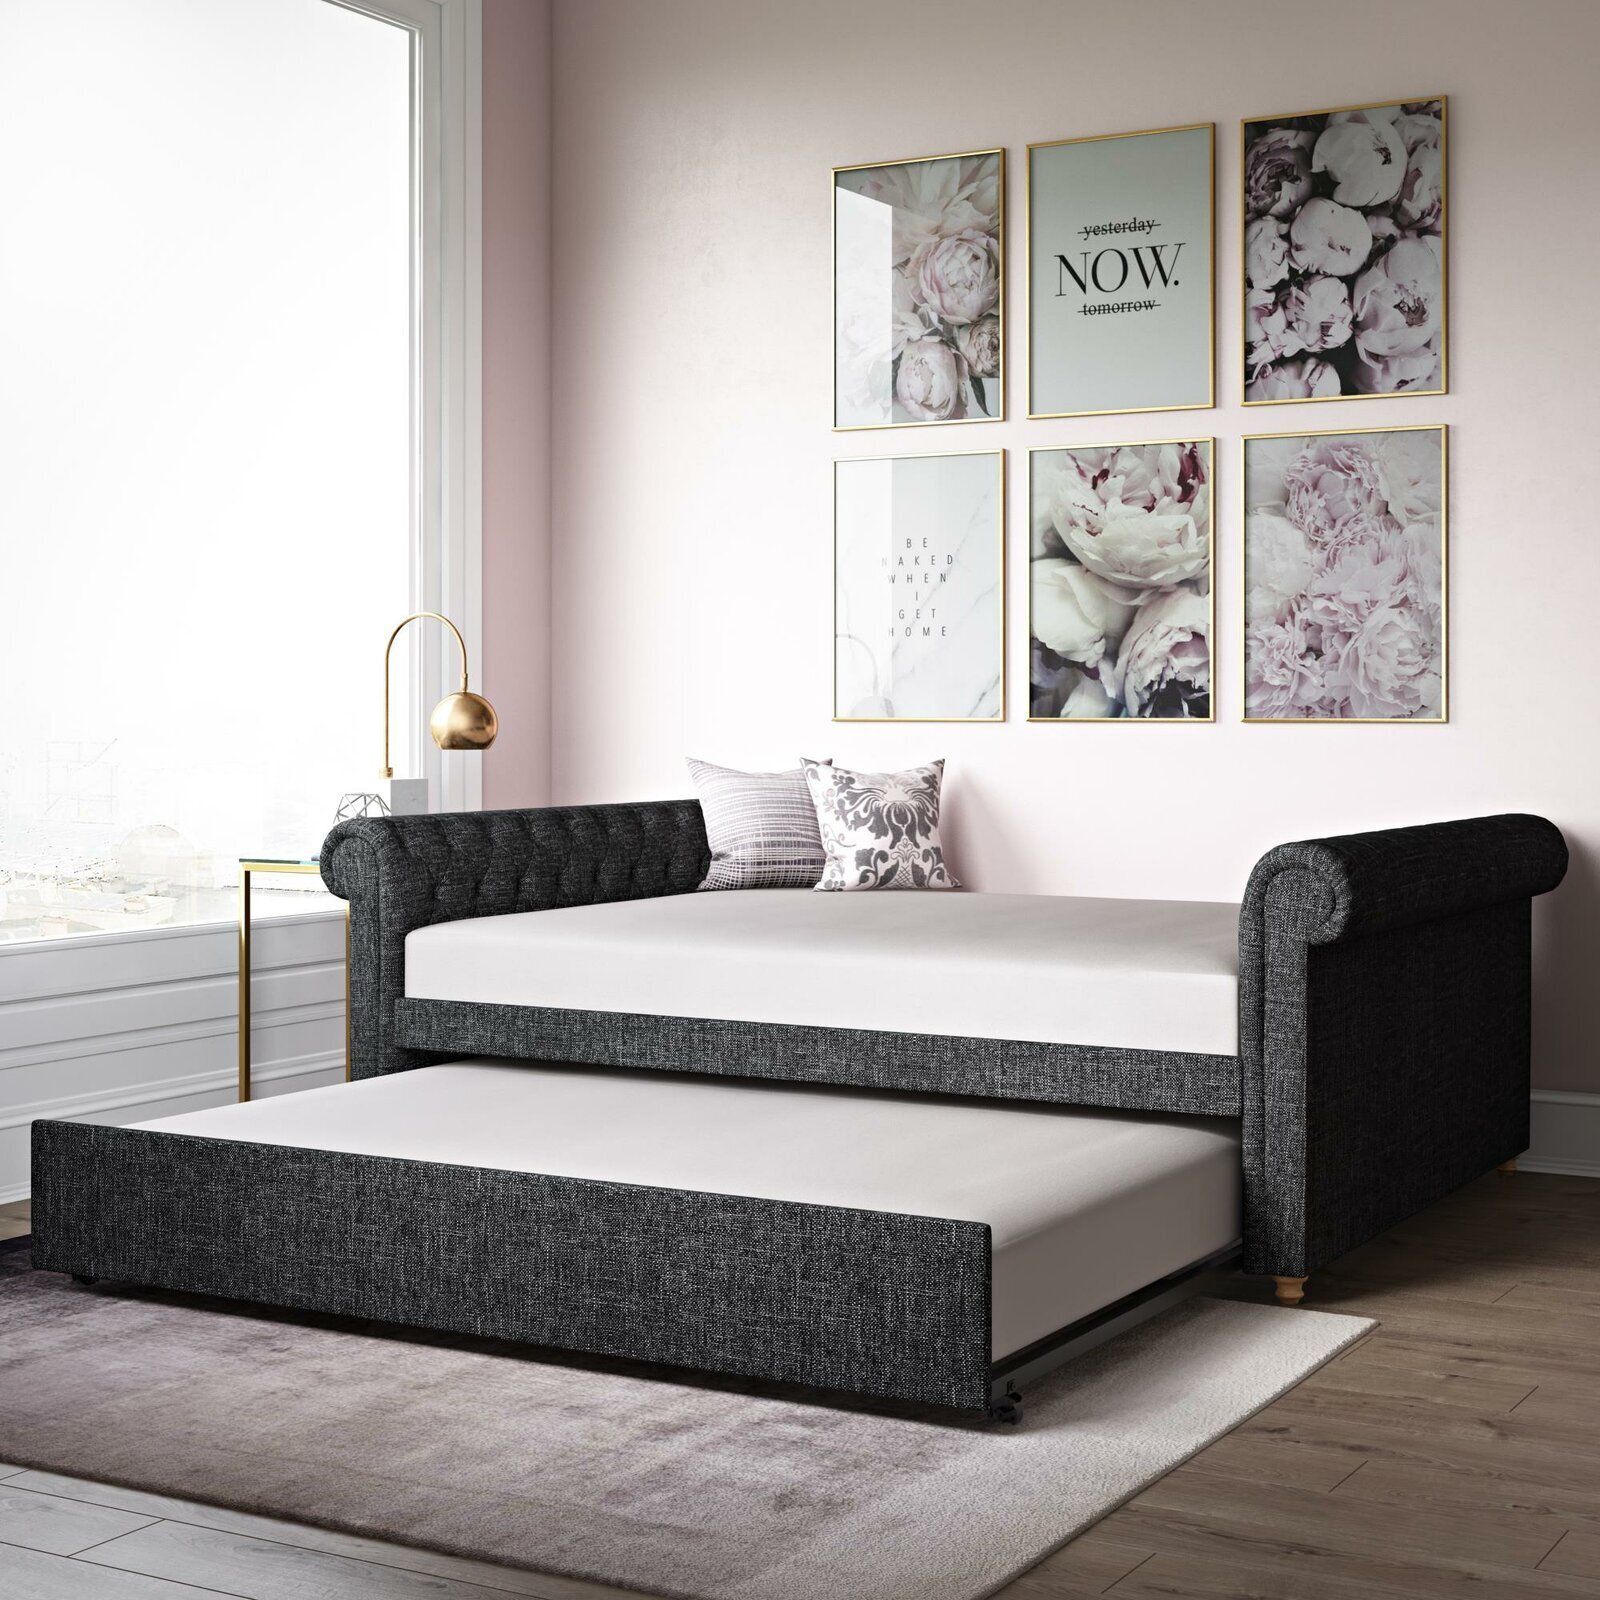 Two Sided Daybed Converts to Queen